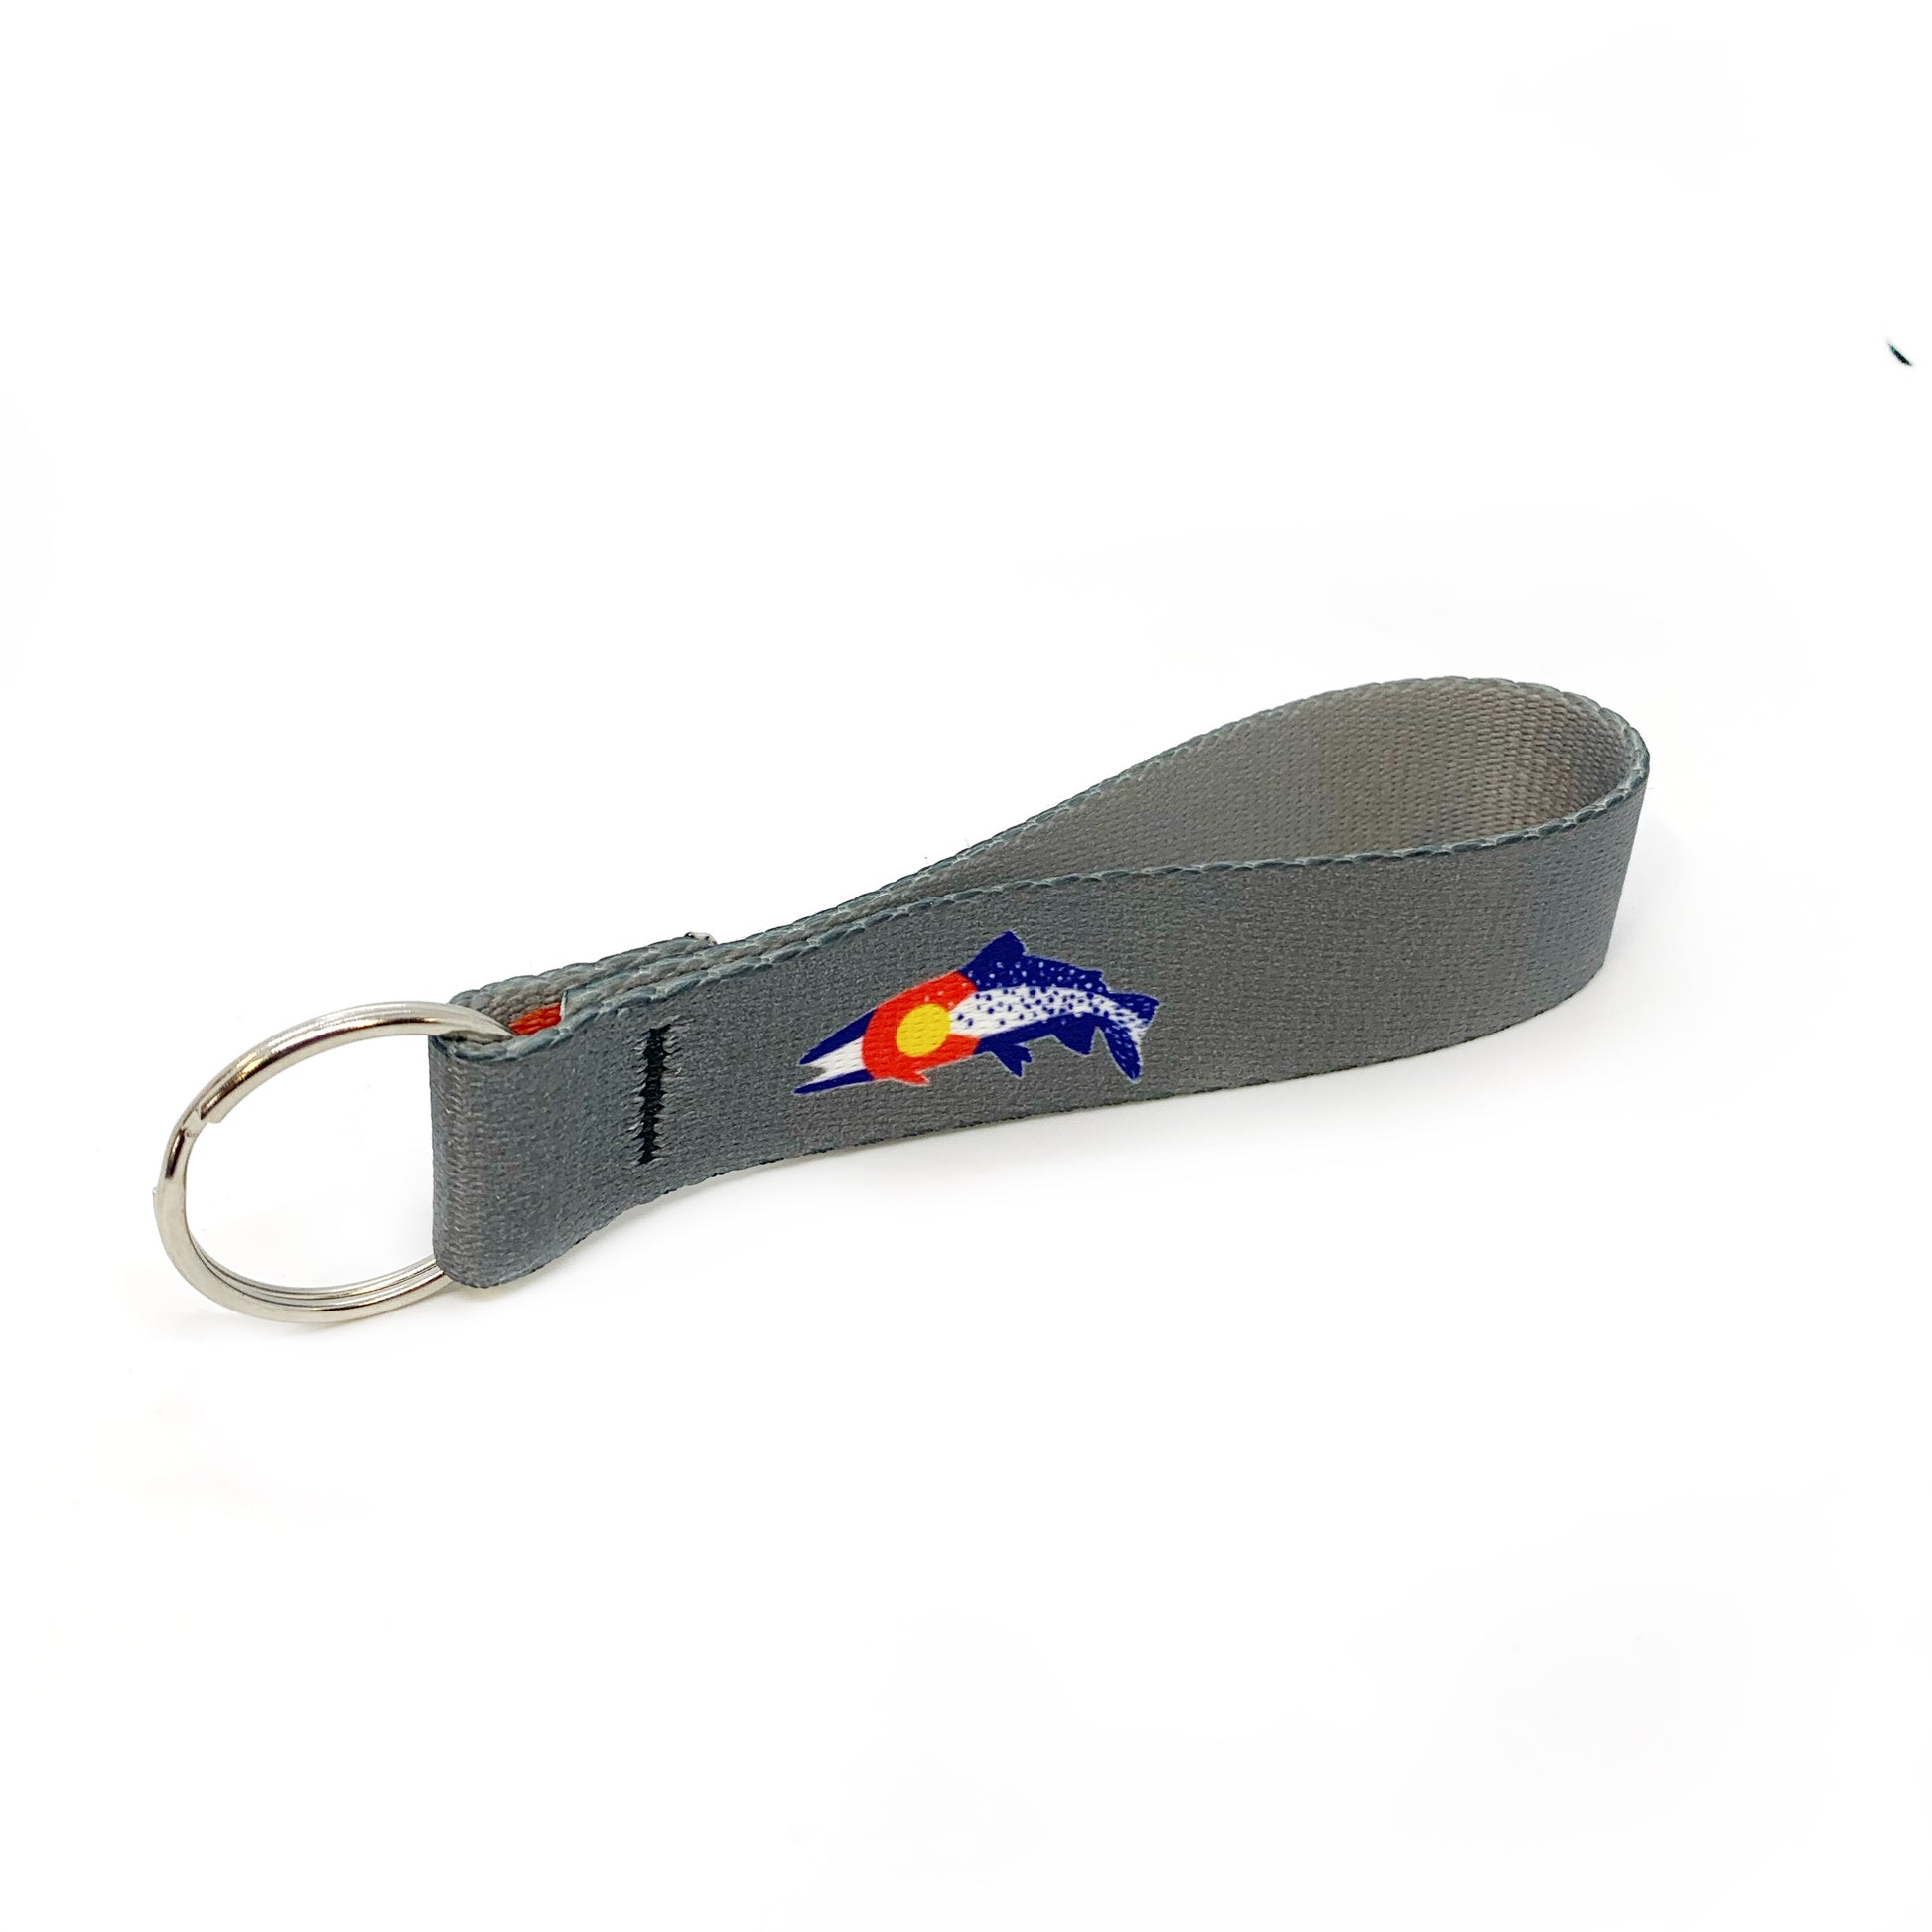 Key ring with two keys connected to a loop of nylon webbing with repeated trout in colorado flag colors.